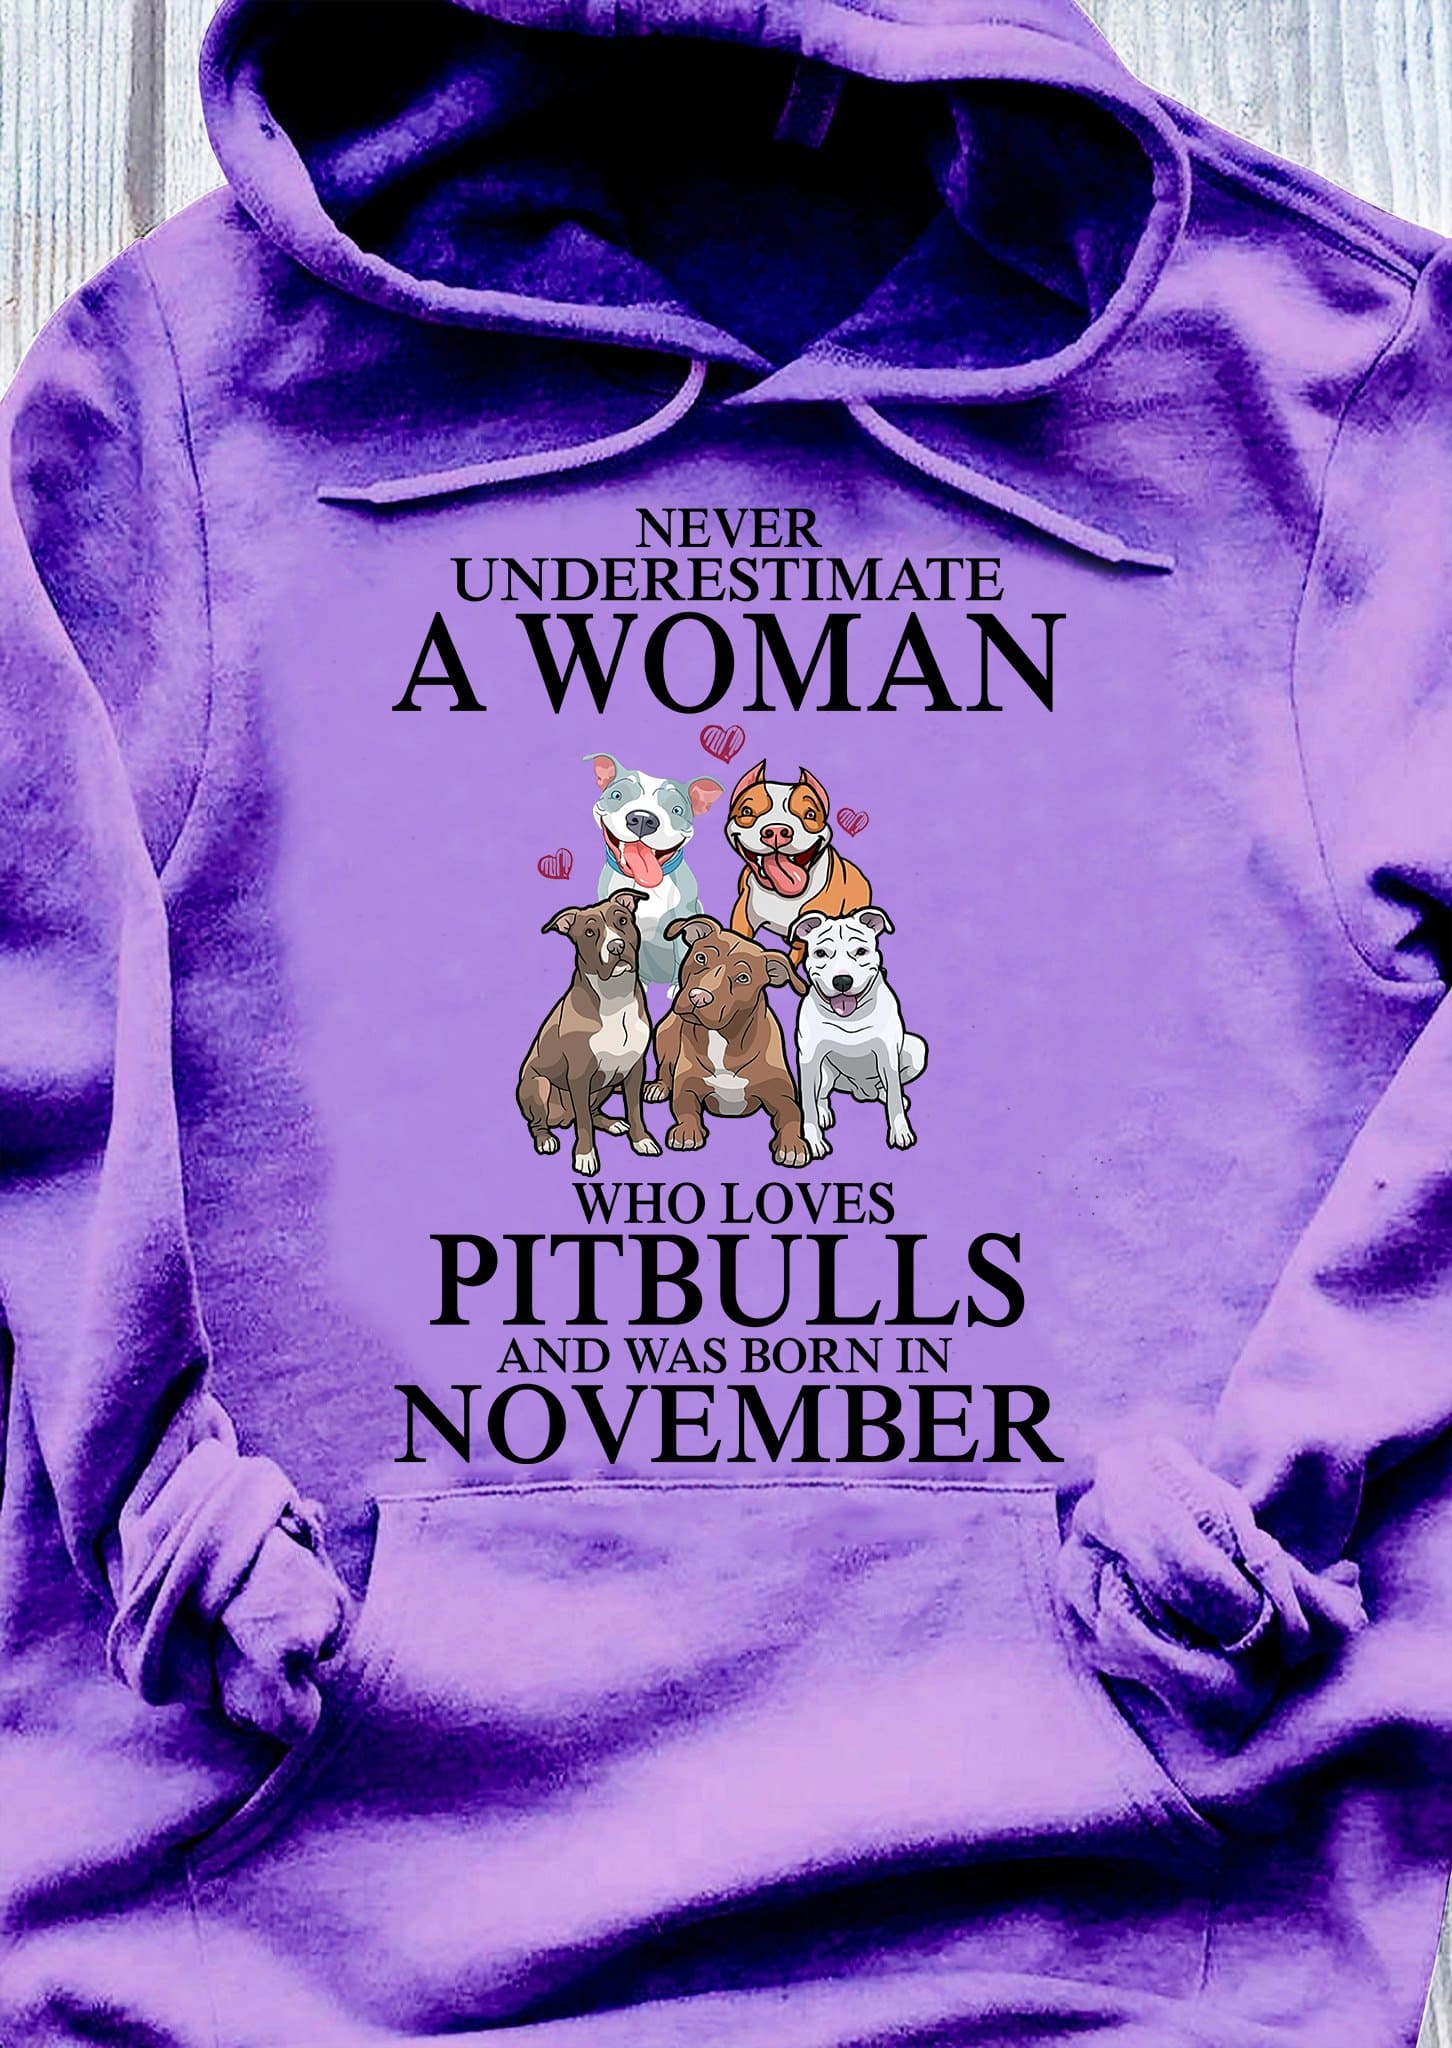 Never underestimate a woman who loves Pitbulls and was born in November - Pitbull dog lover